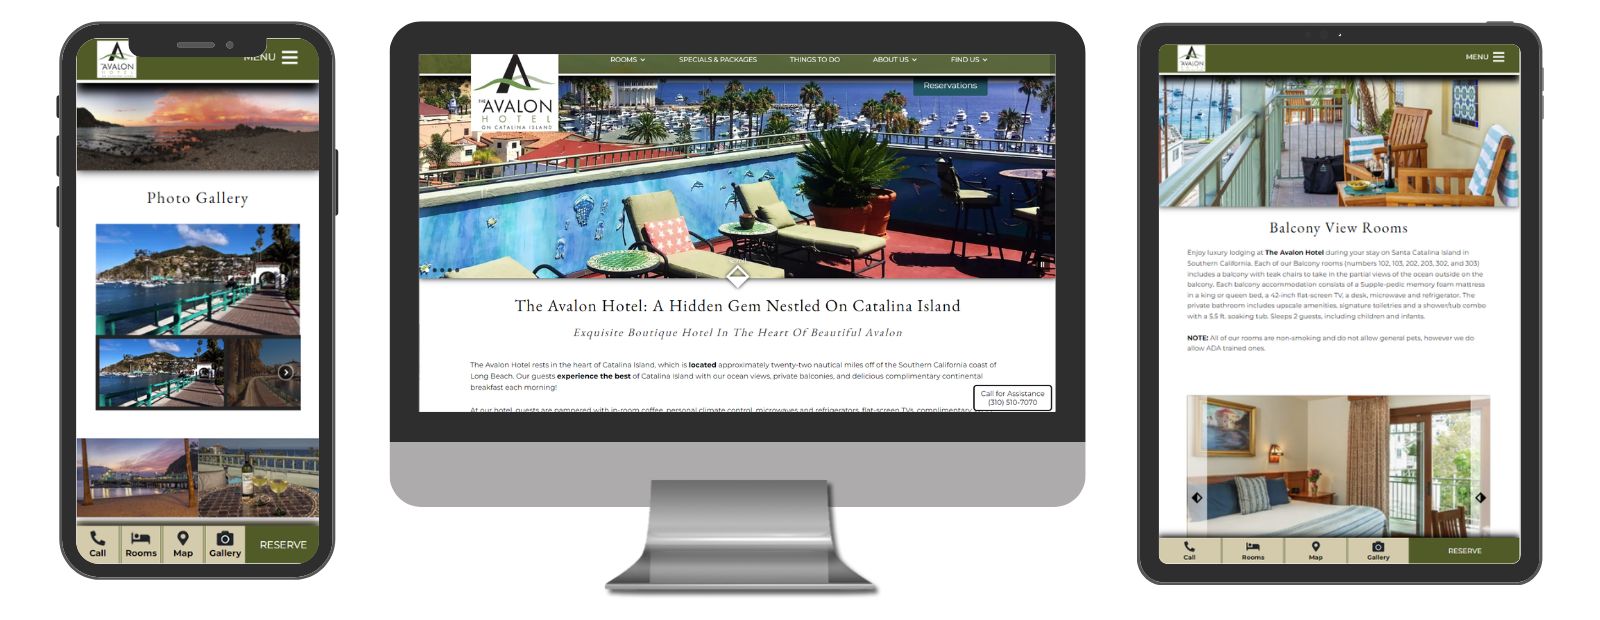 Screenshot of Desktop, Mobile and tablet views of the website for The Avalon Hotel